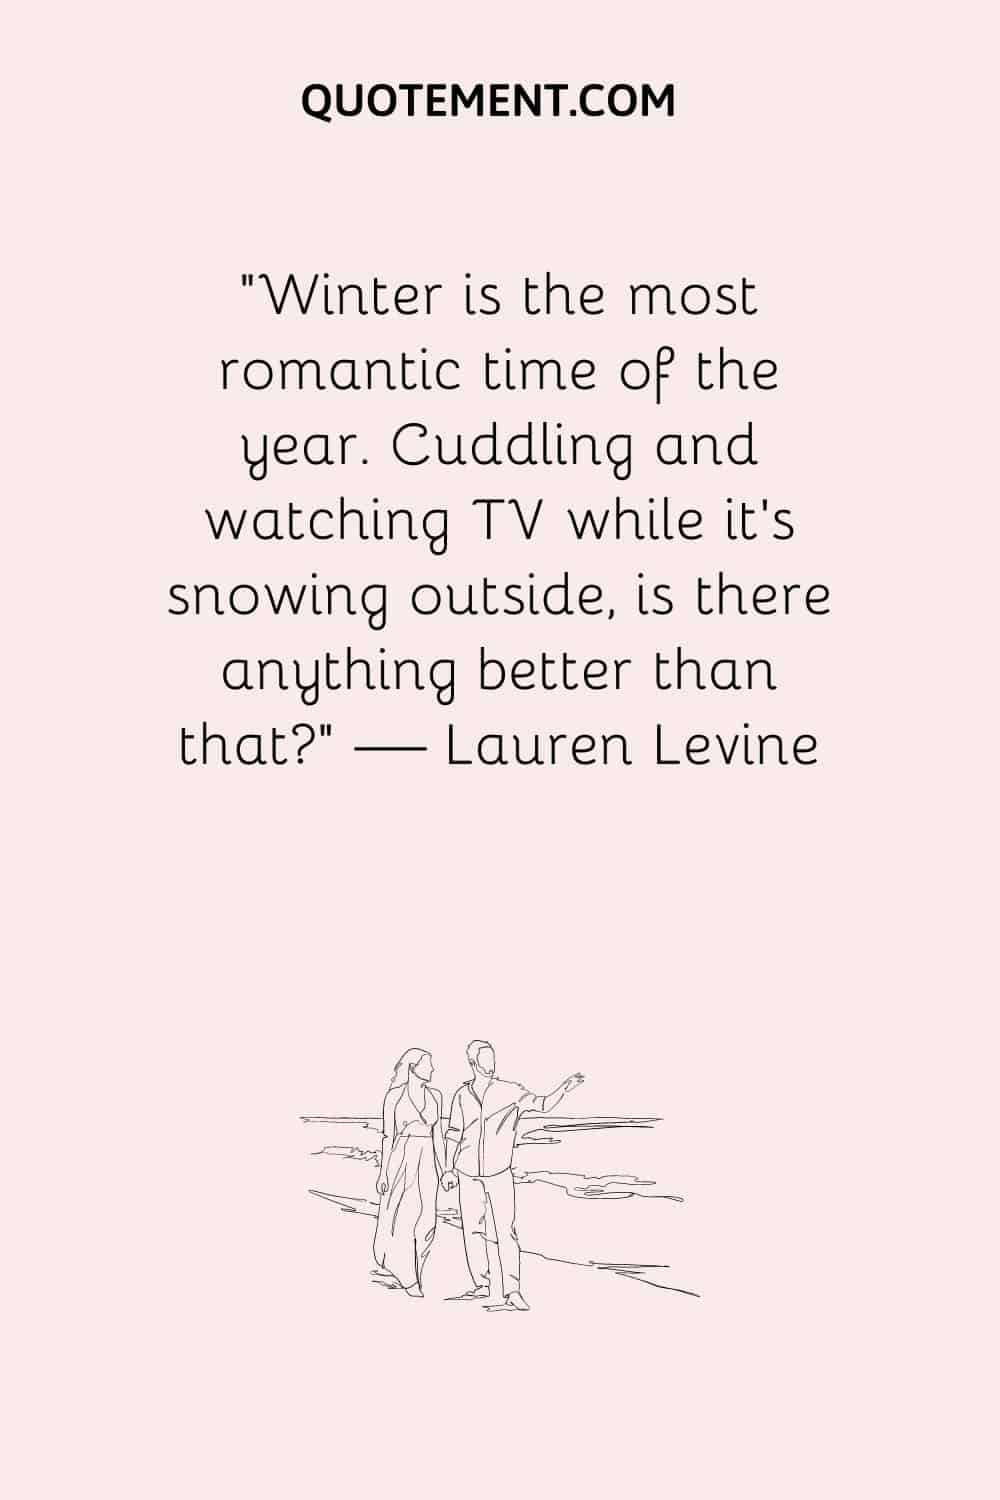 Winter is the most romantic time of the year